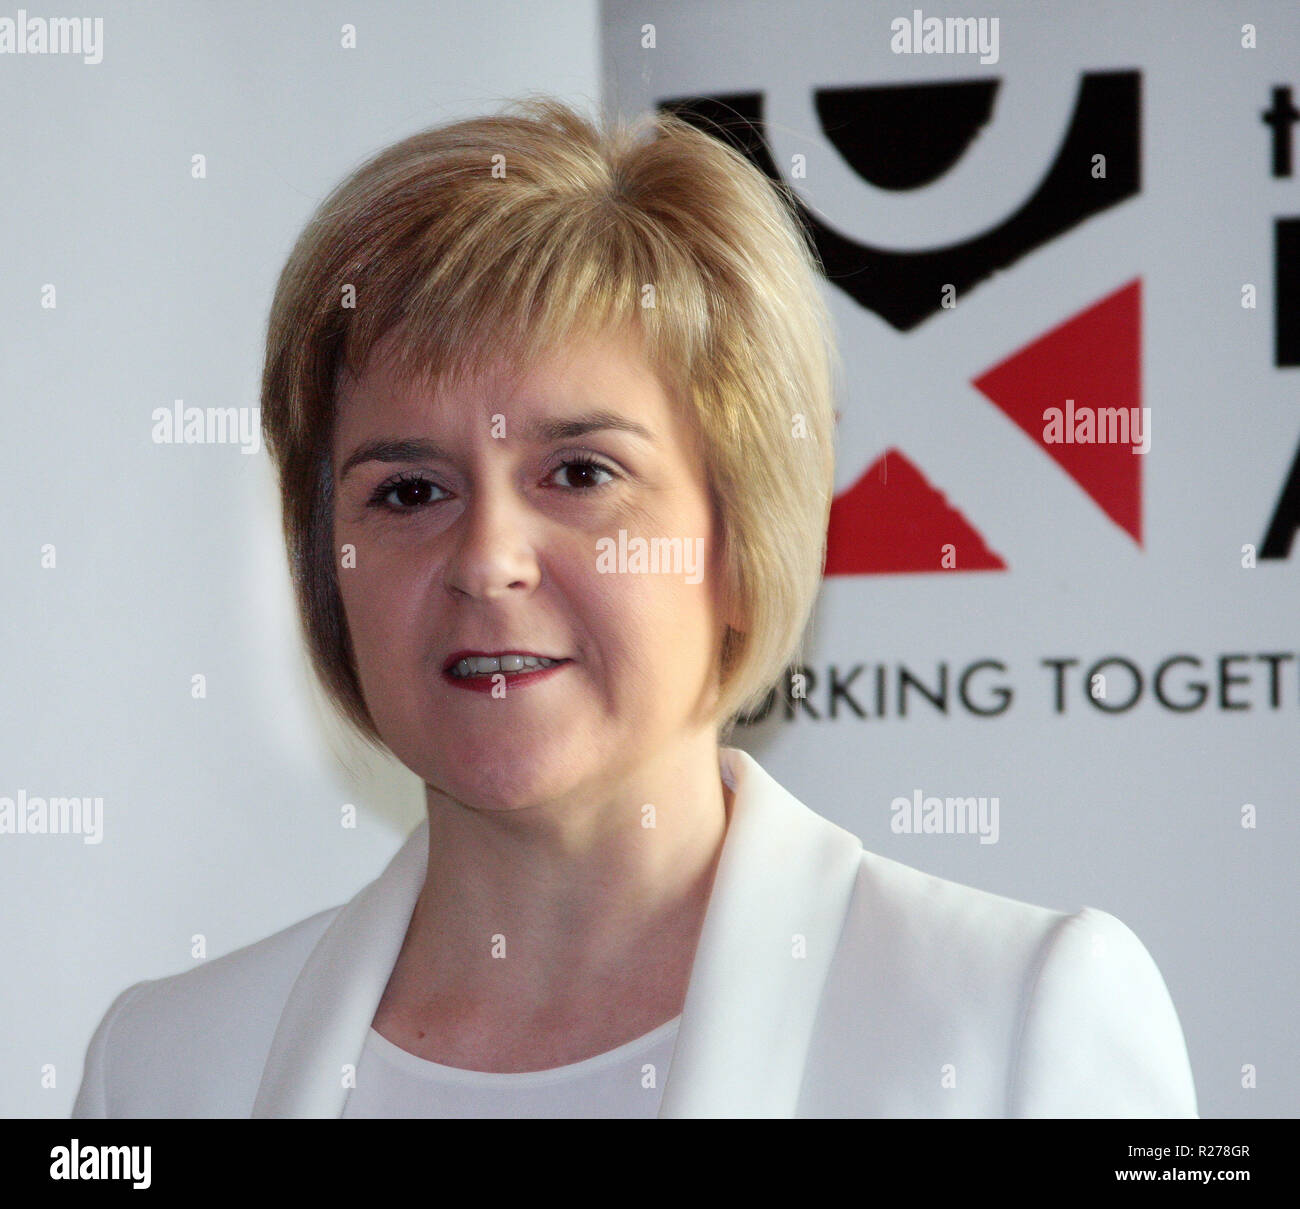 Nicola Sturgeon is an MSP and the leader of the Scottish National Party, and First Minister, at Hollyrood where the Scottish parliament sits. Stock Photo